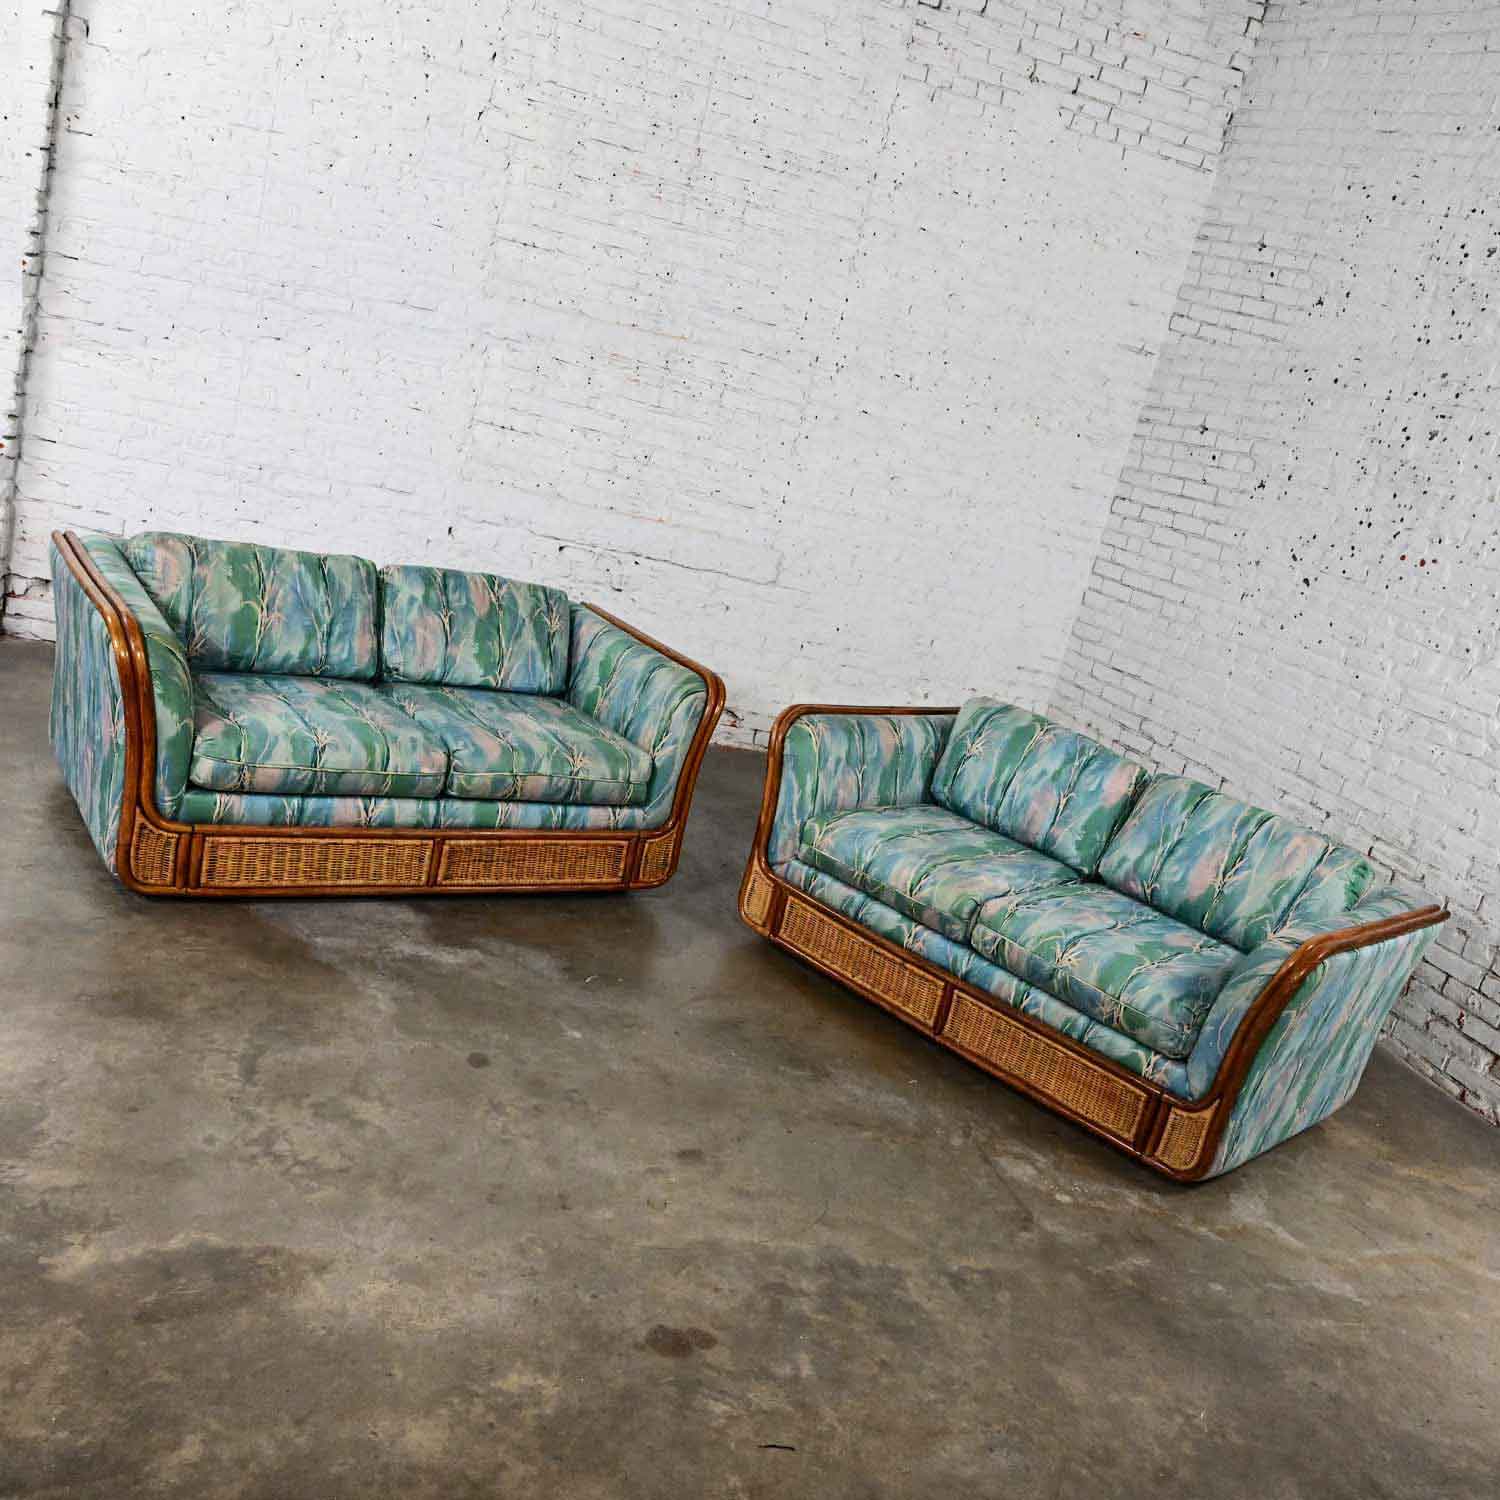 Late 20th Century Boho Chic Rattan & Wicker Tuxedo Style Upholstered Loveseat Sofas a Pair